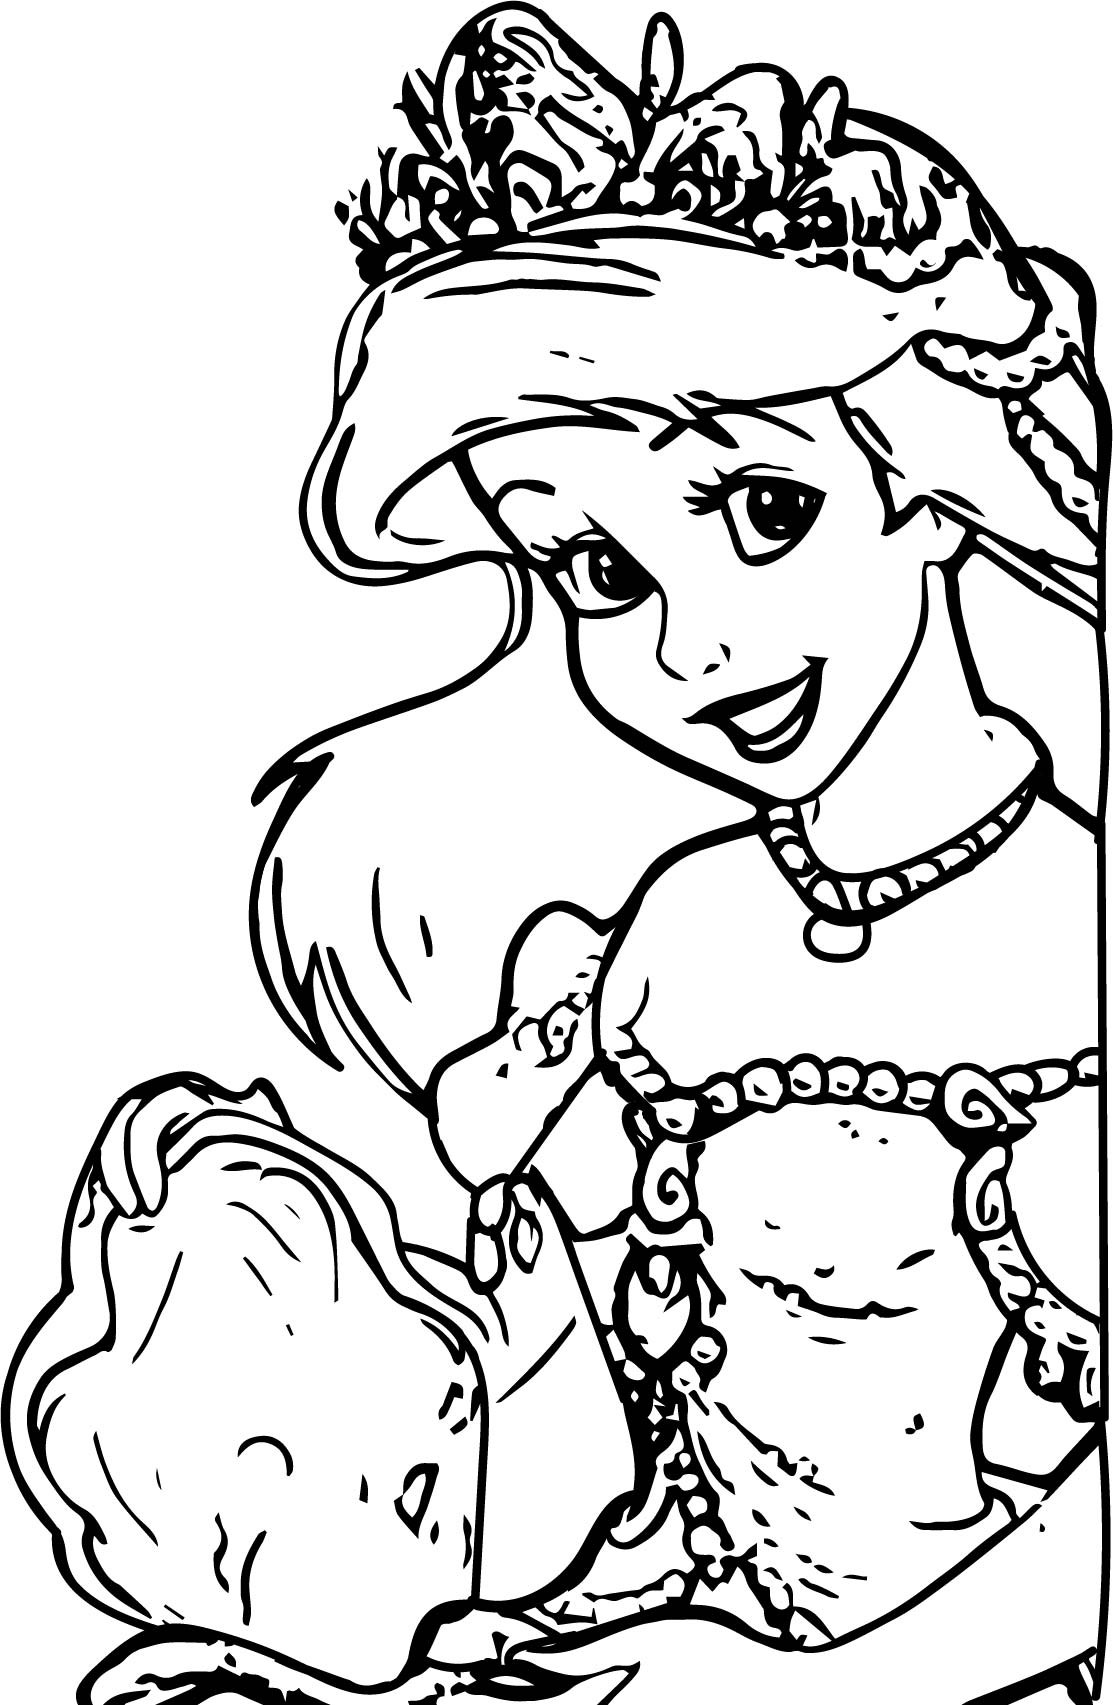 Baby Princess Coloring Pages
 Baby Disney Princesses Coloring Pages at GetColorings